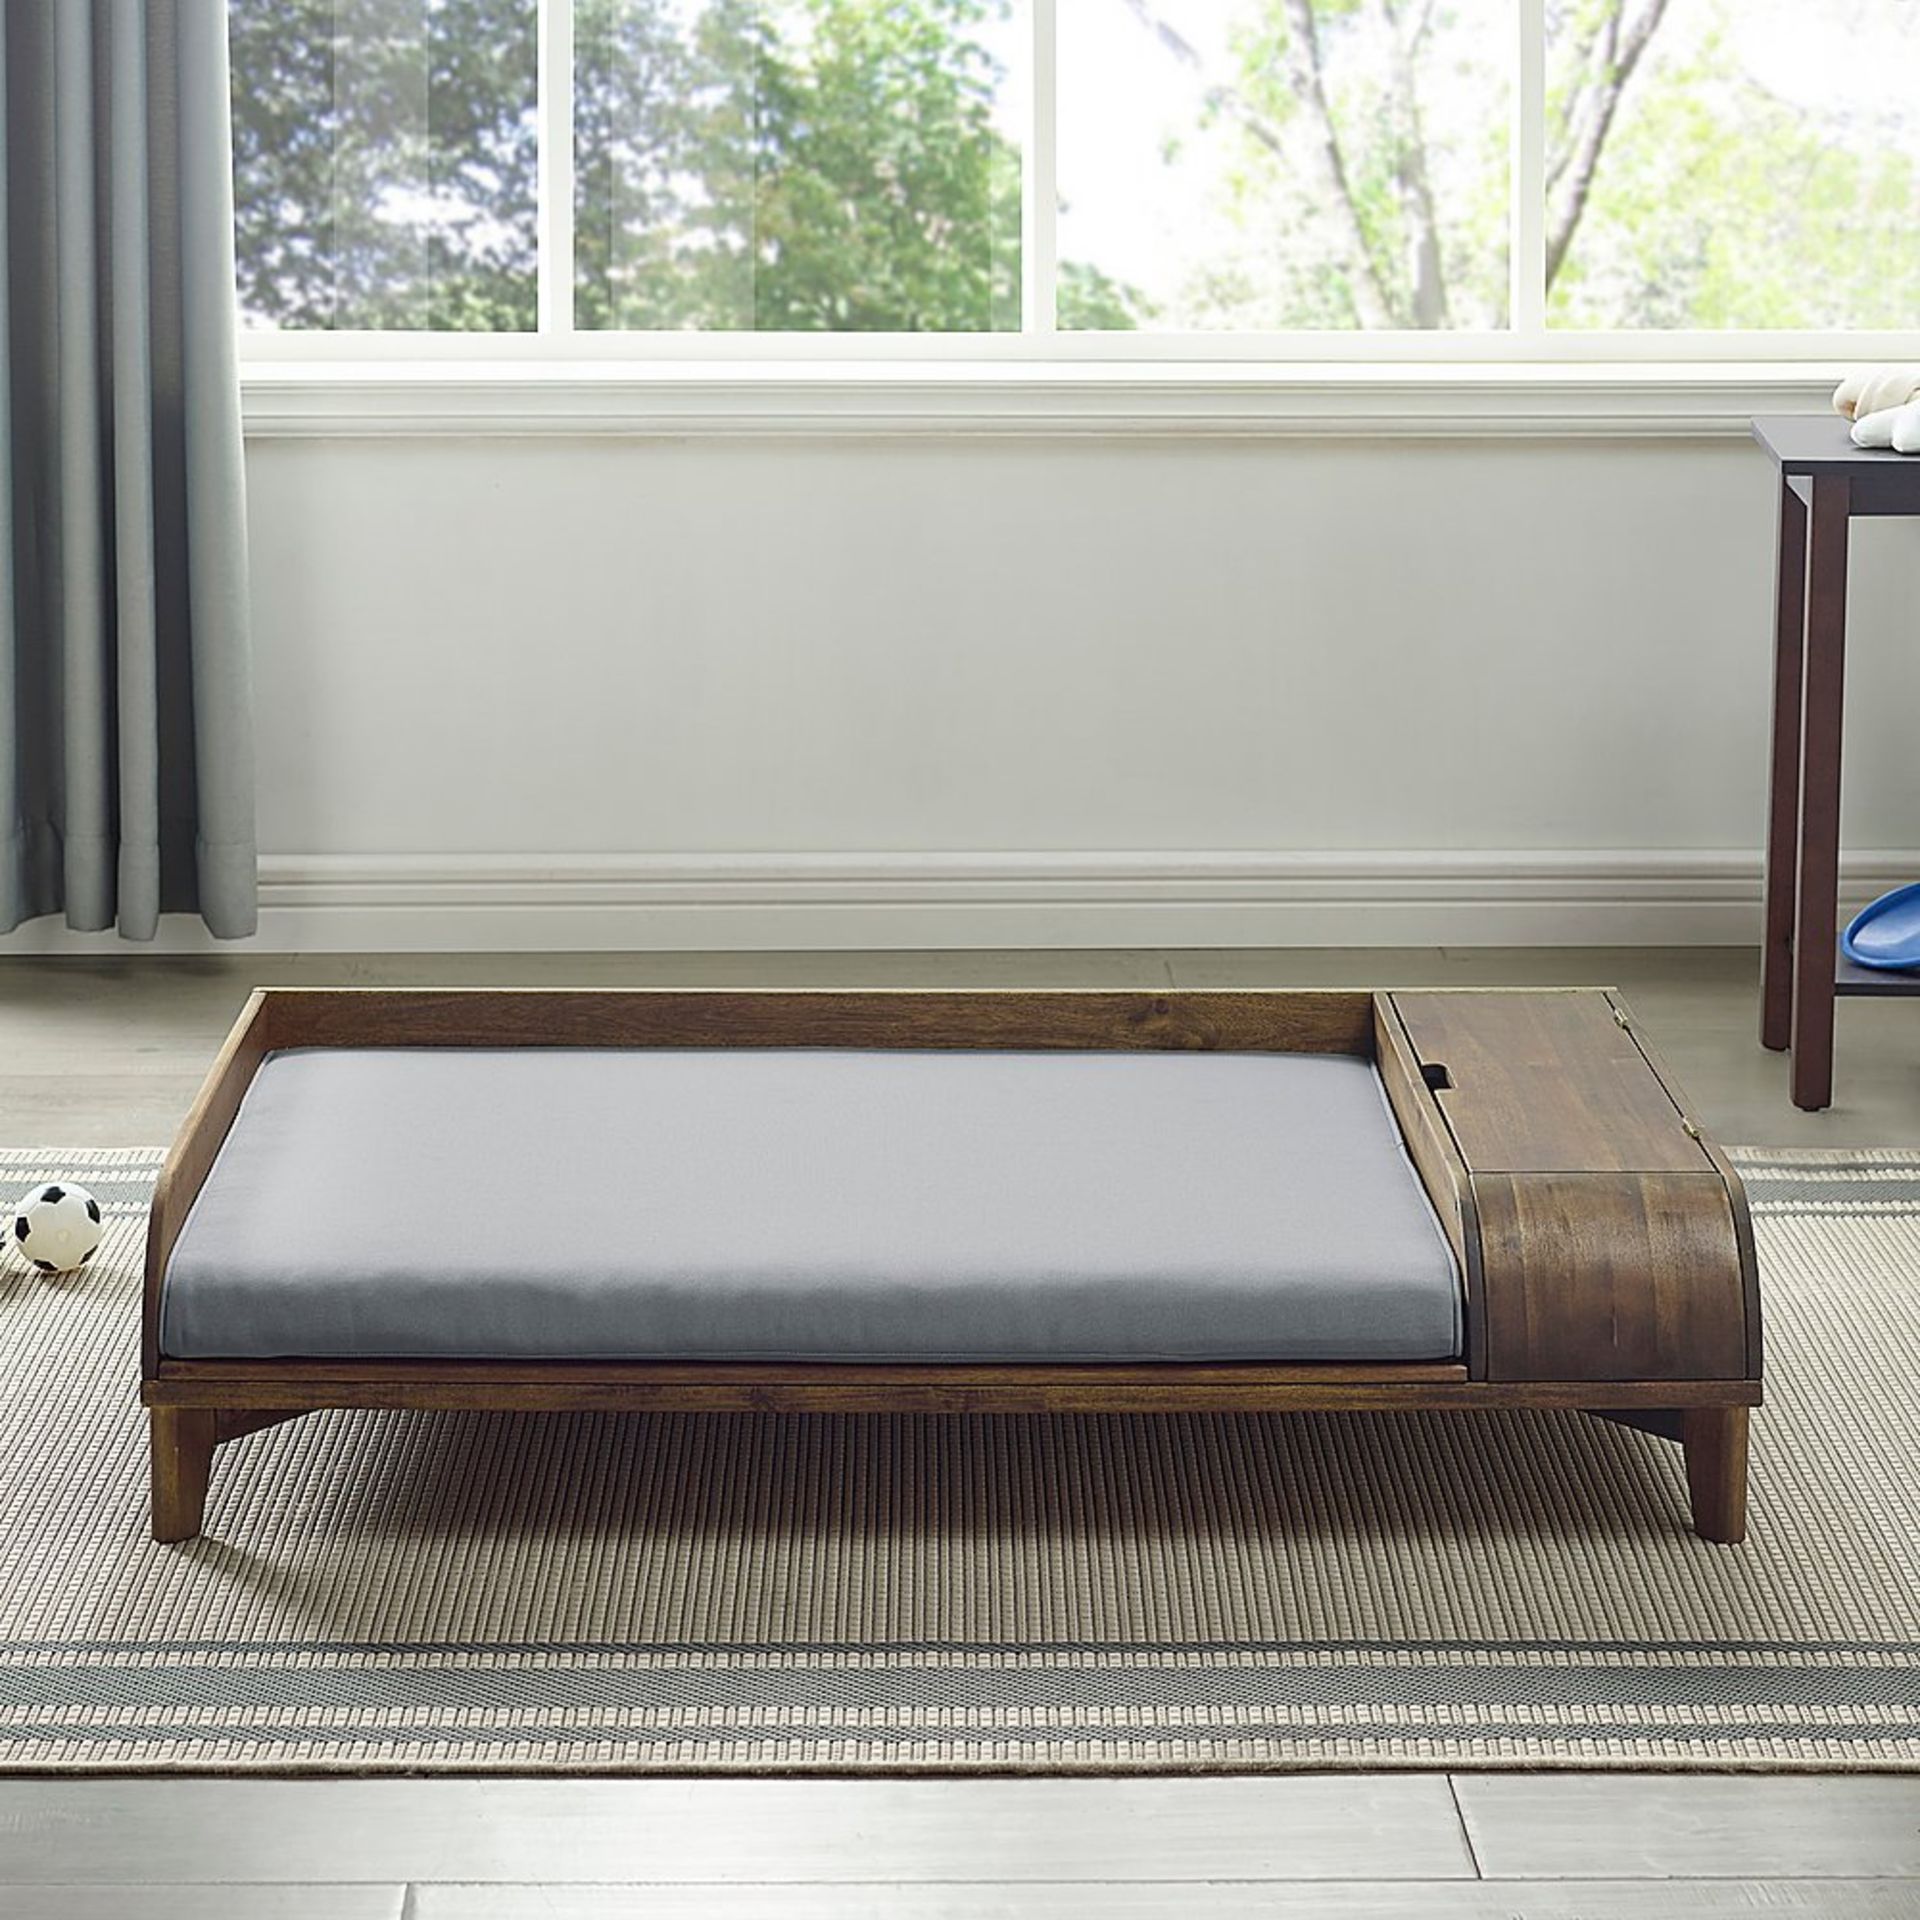 A1 PRODUCT NEW - SOLID WOOD STORAGE PED BED WITH CUSHION IN DARK BROWN/GREY - RRP Ã‚Â£245 - Image 2 of 7